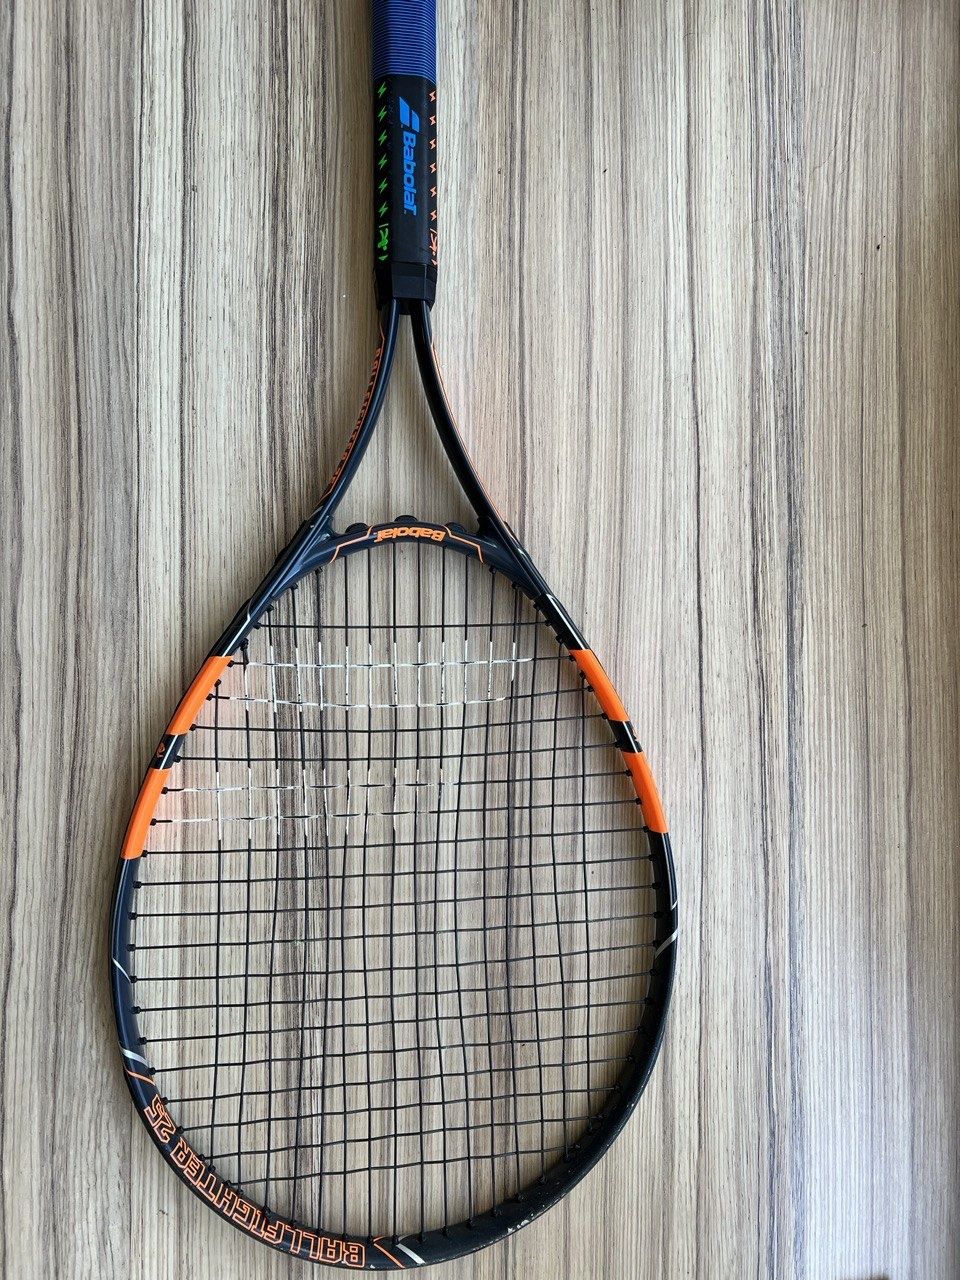 Babolat ball fighter 25